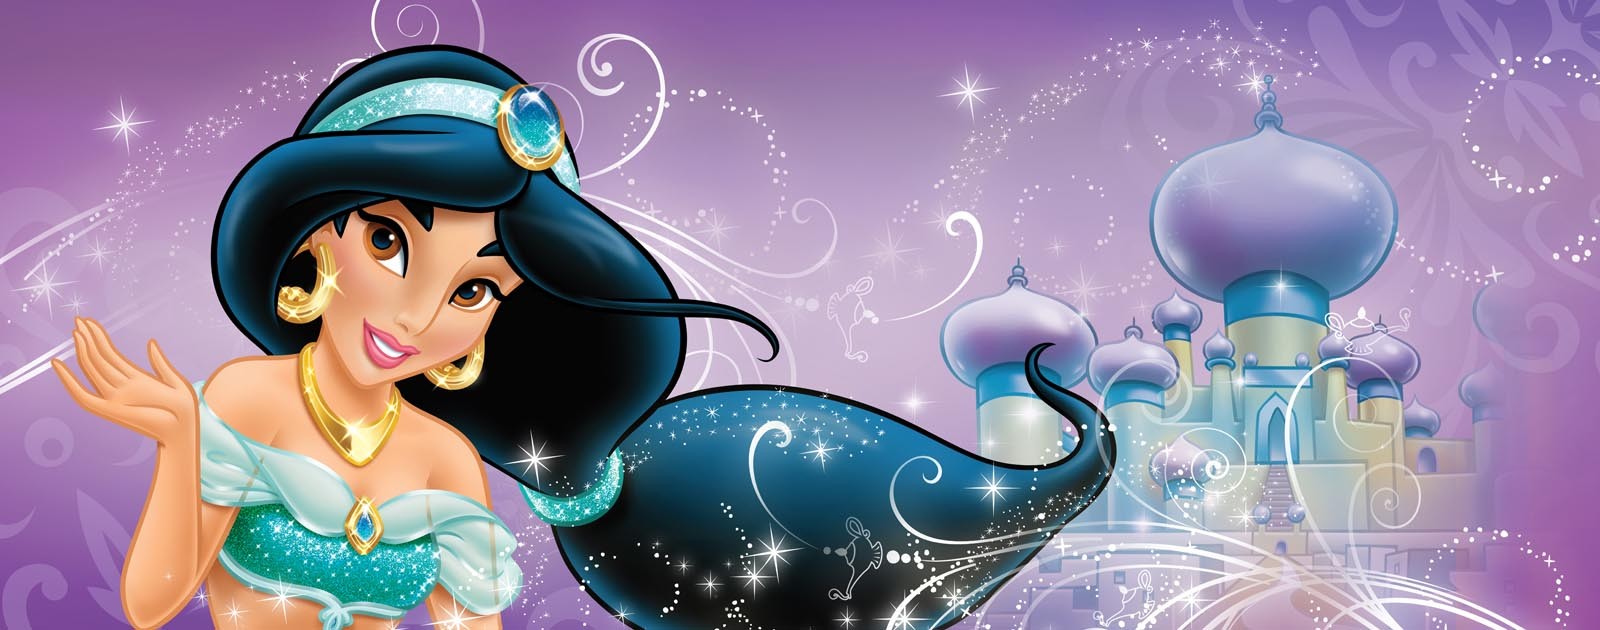 You got: Jasmine! 👑 Your Opinions on Disney Princes Will Determine Which Princess You Are